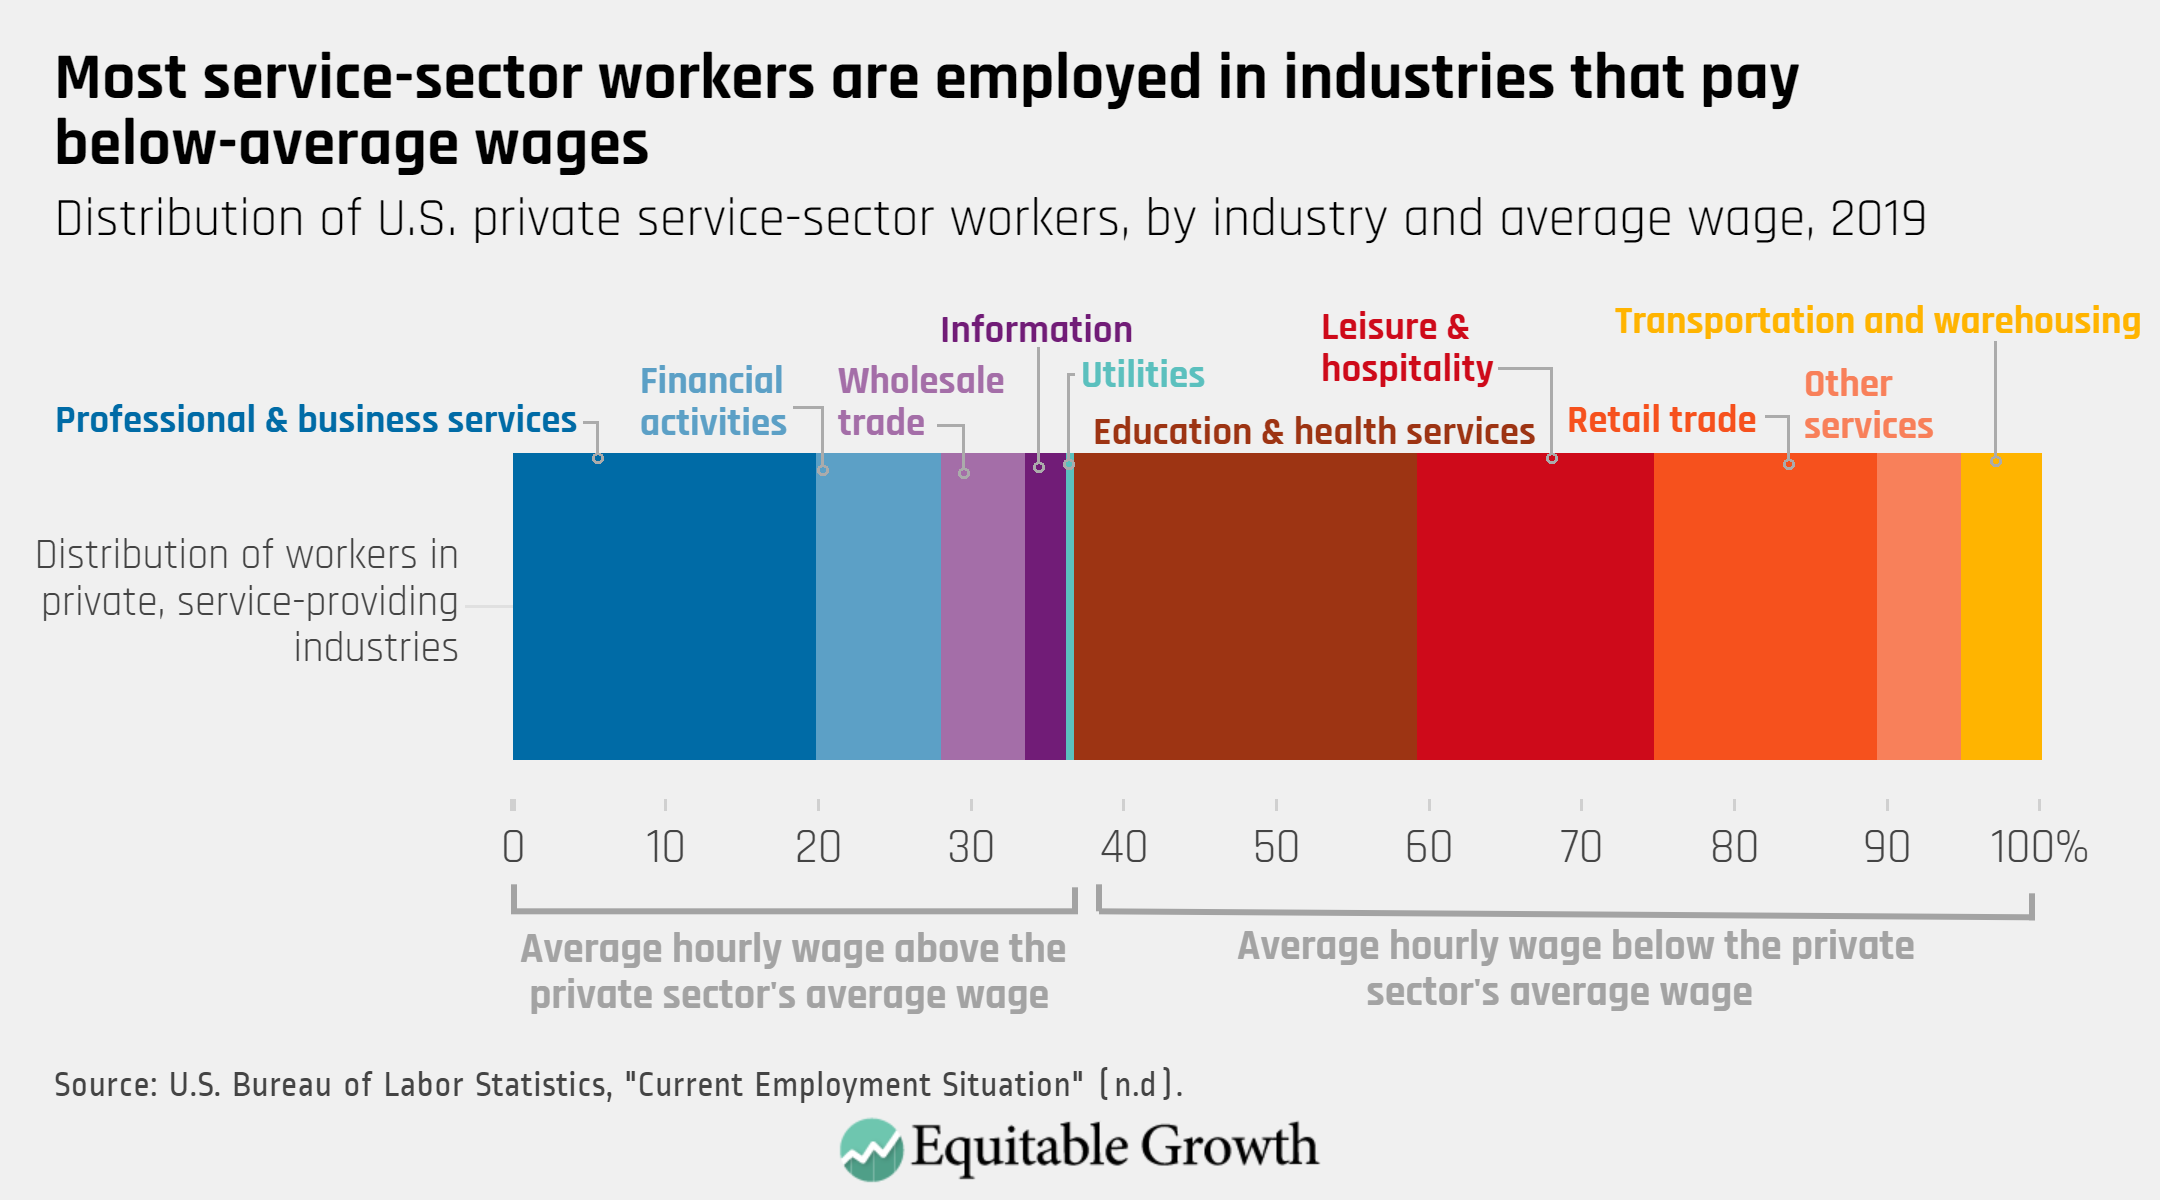 Distribution of U.S. private service-sector workers, by industry and average wage, 2019